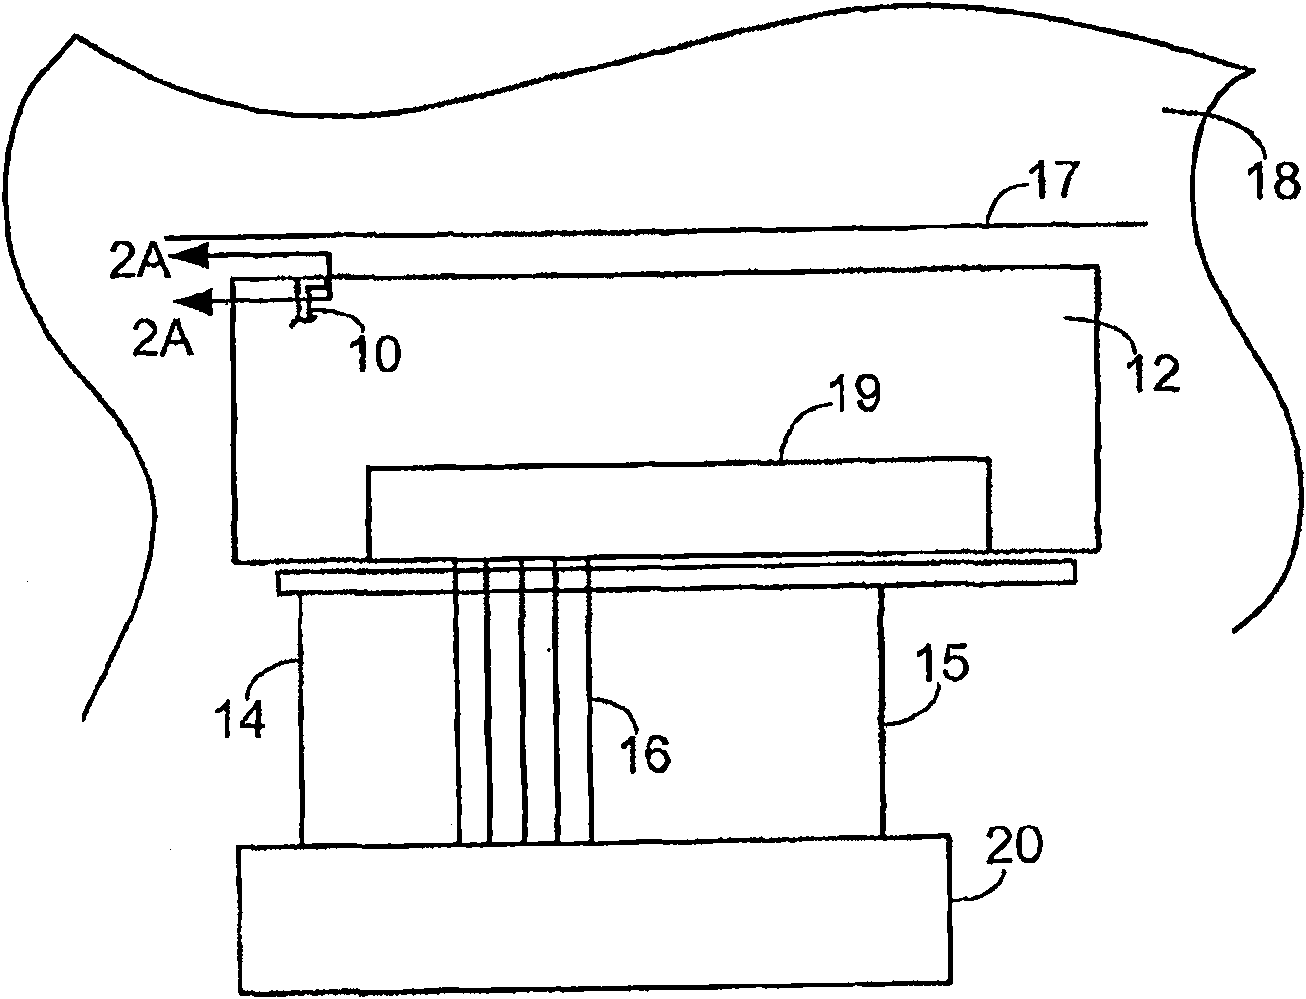 High frequency droplet ejection device and method